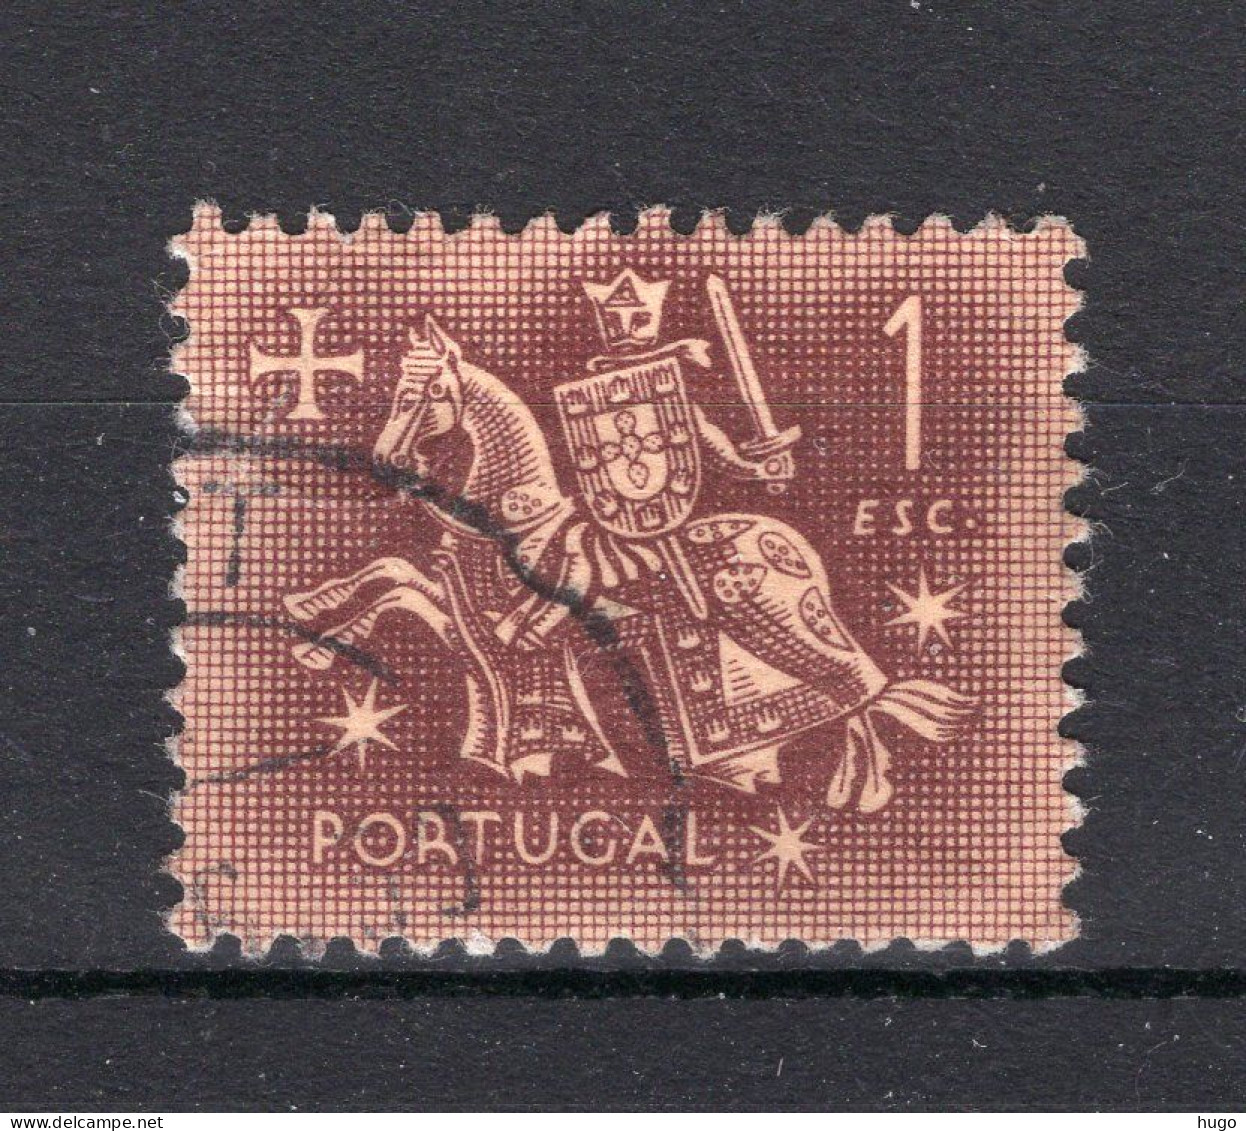 PORTUGAL Yt. 779° Gestempeld 1953-1956 - Used Stamps